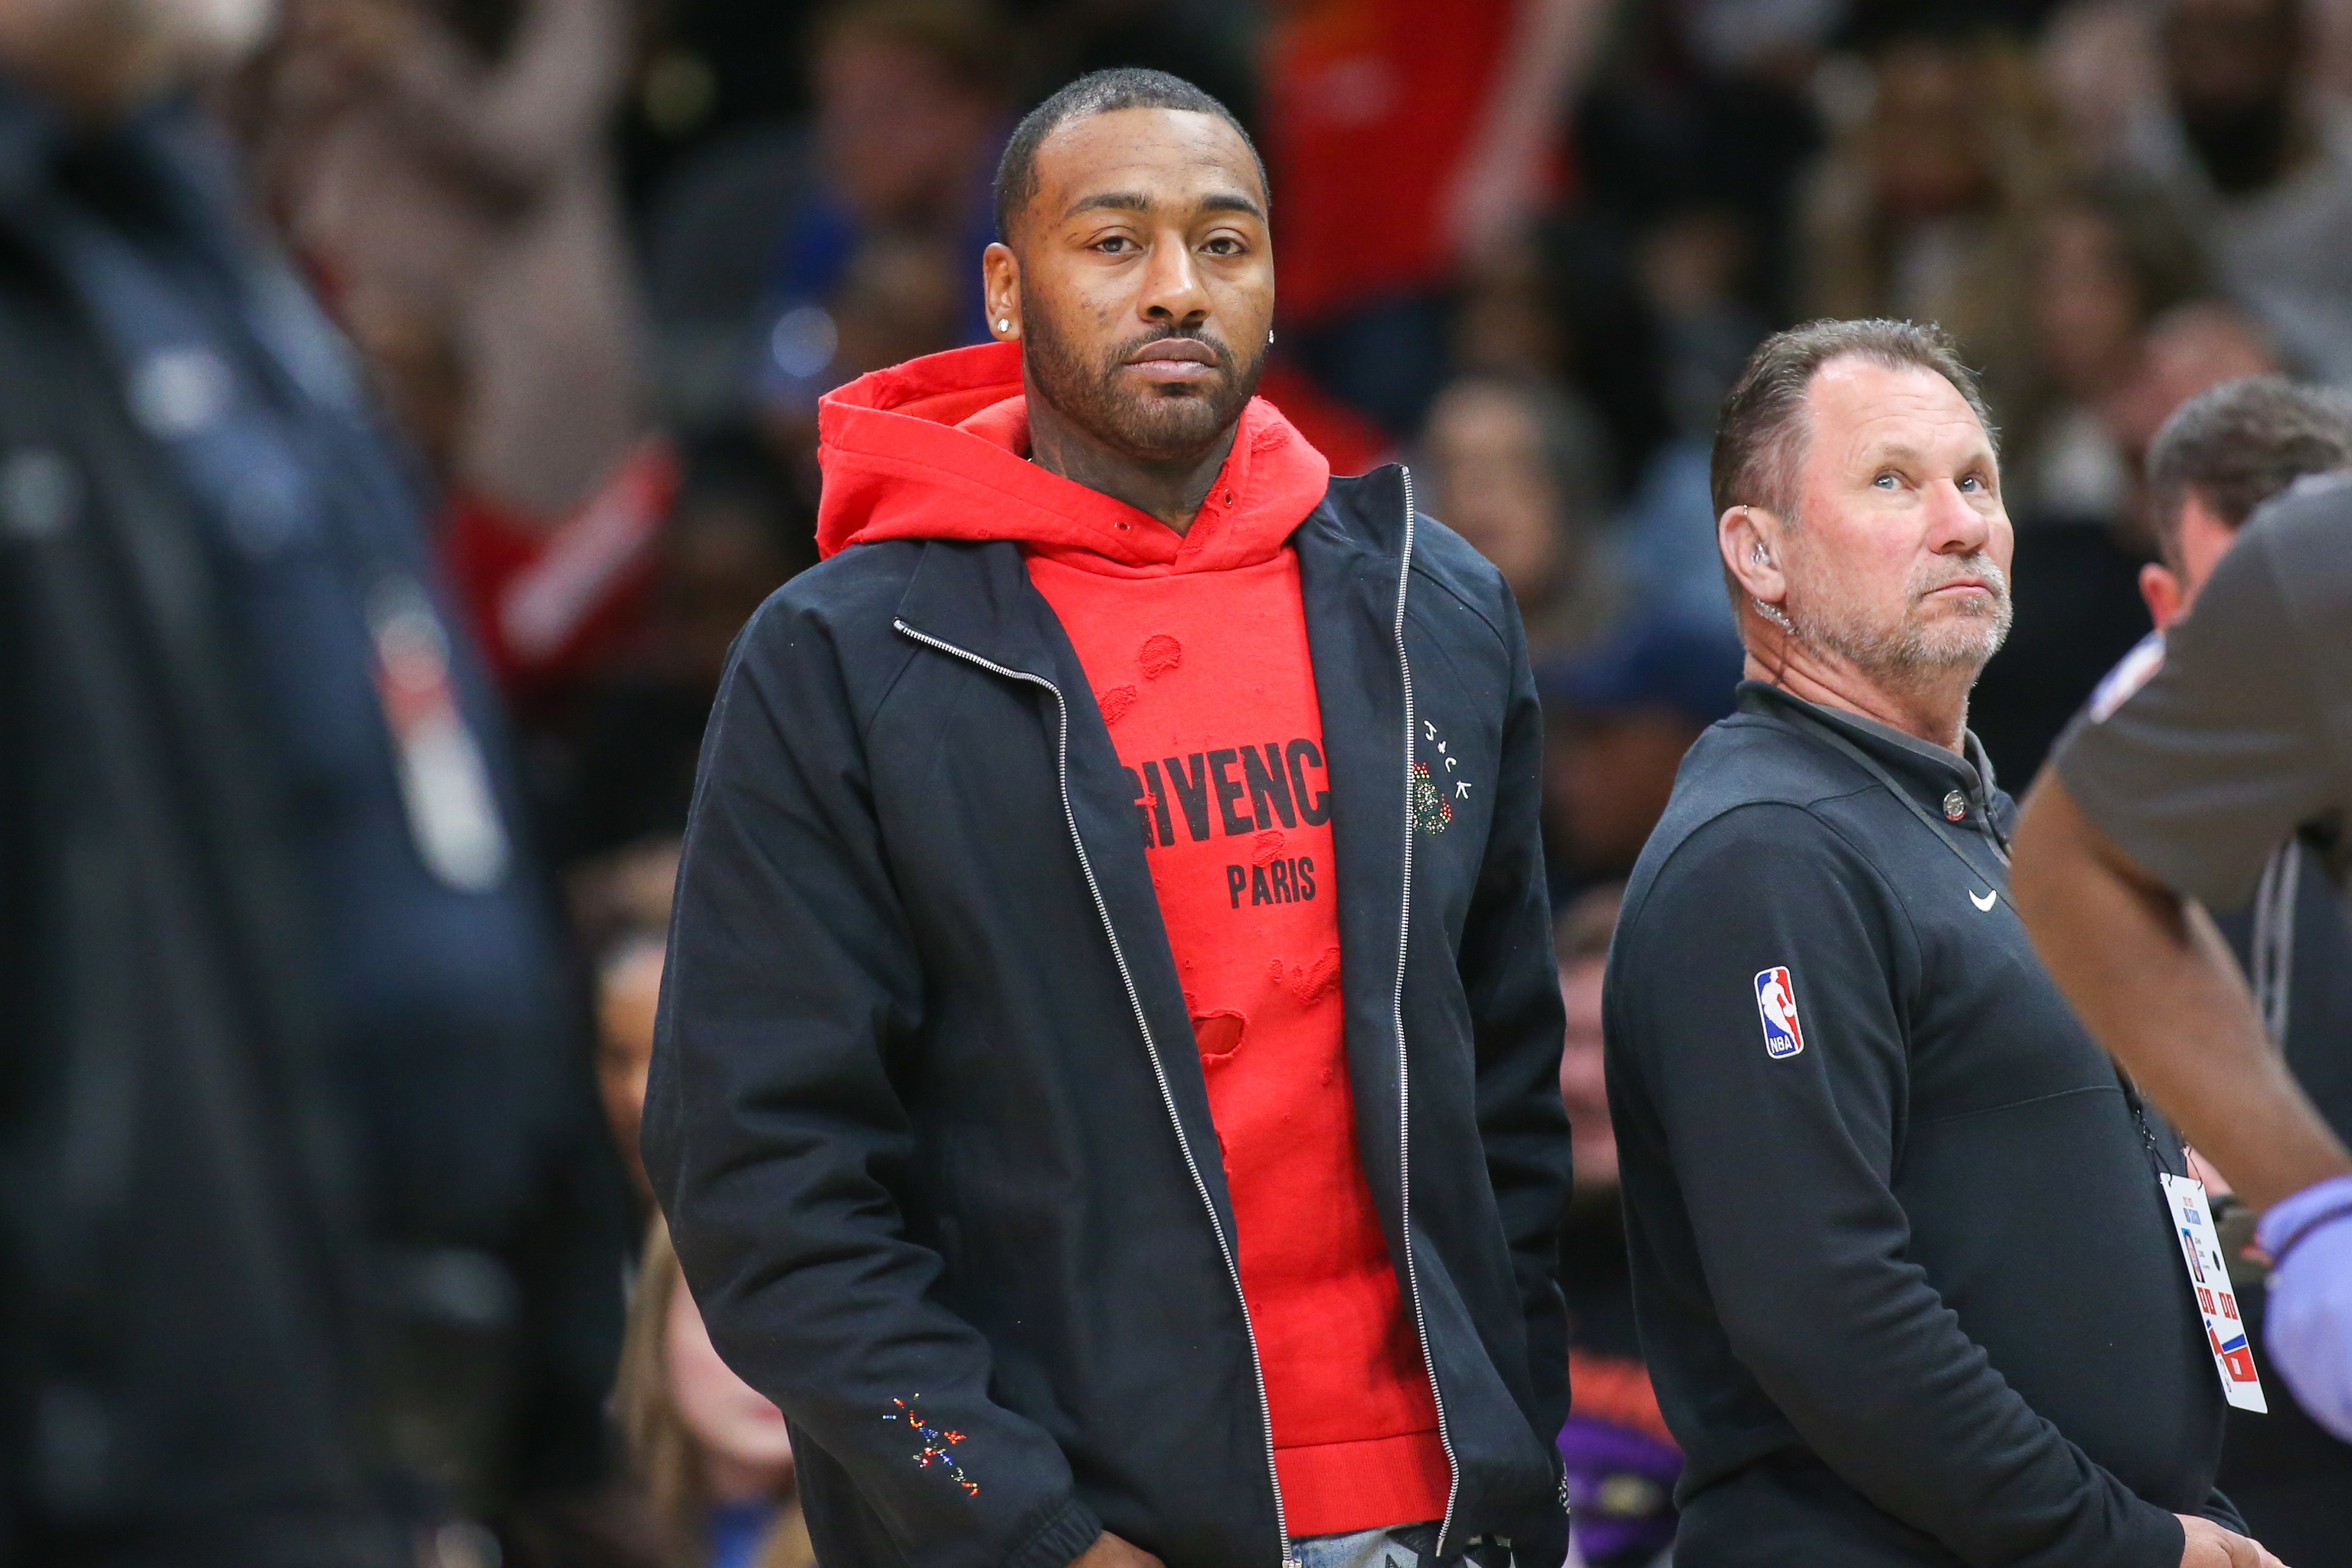 John Wall's up-and-down season mirrors that of Clippers - Los Angeles Times